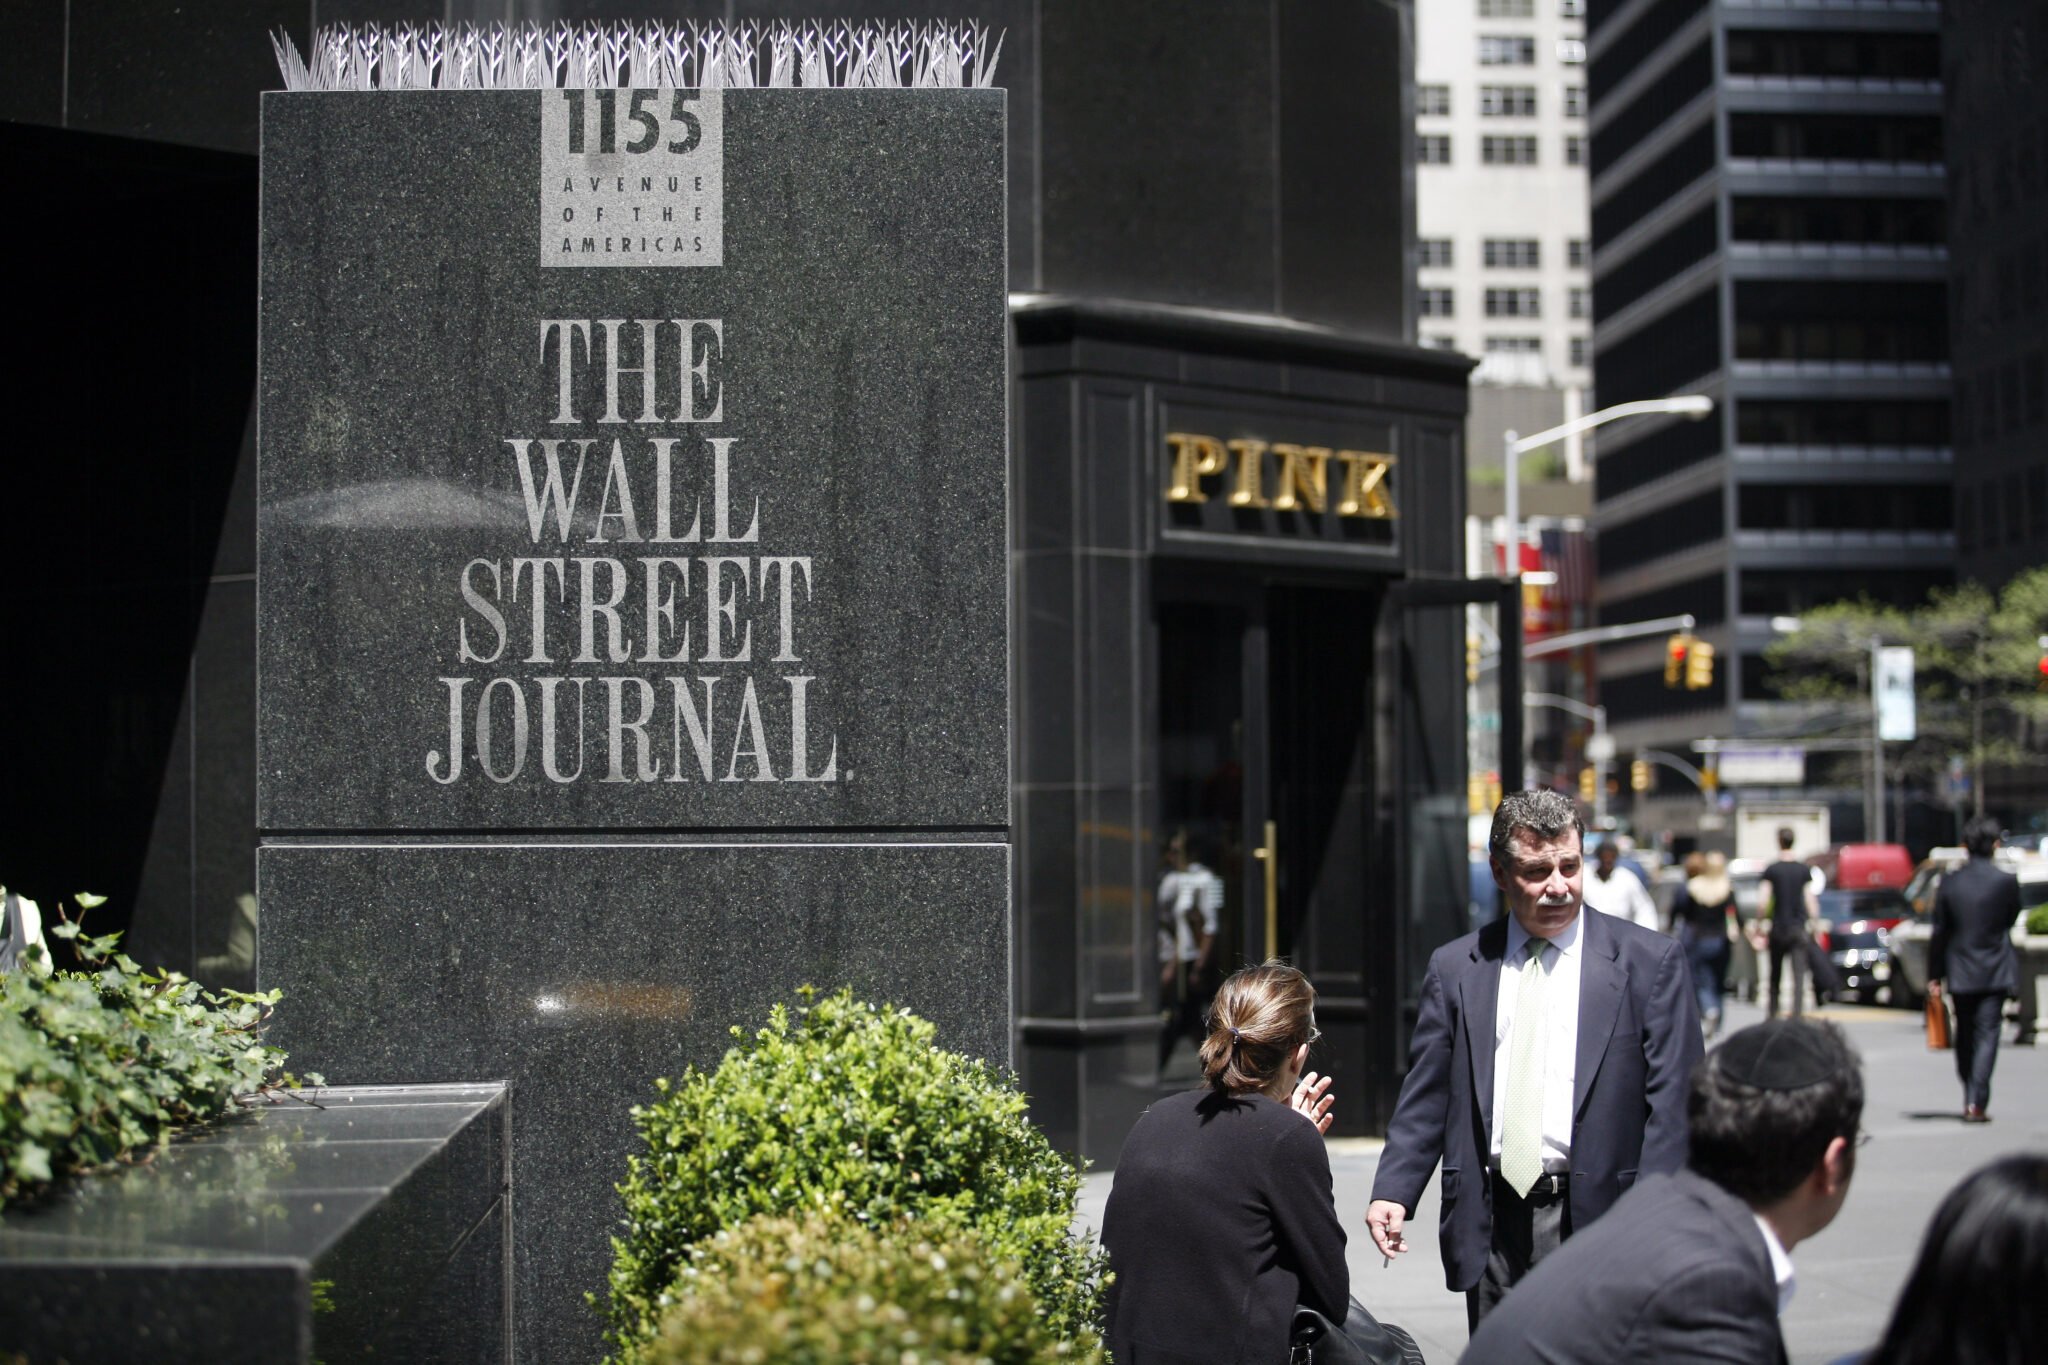 A Range Of Promo Offers To Enjoy For The Wall Street Journal